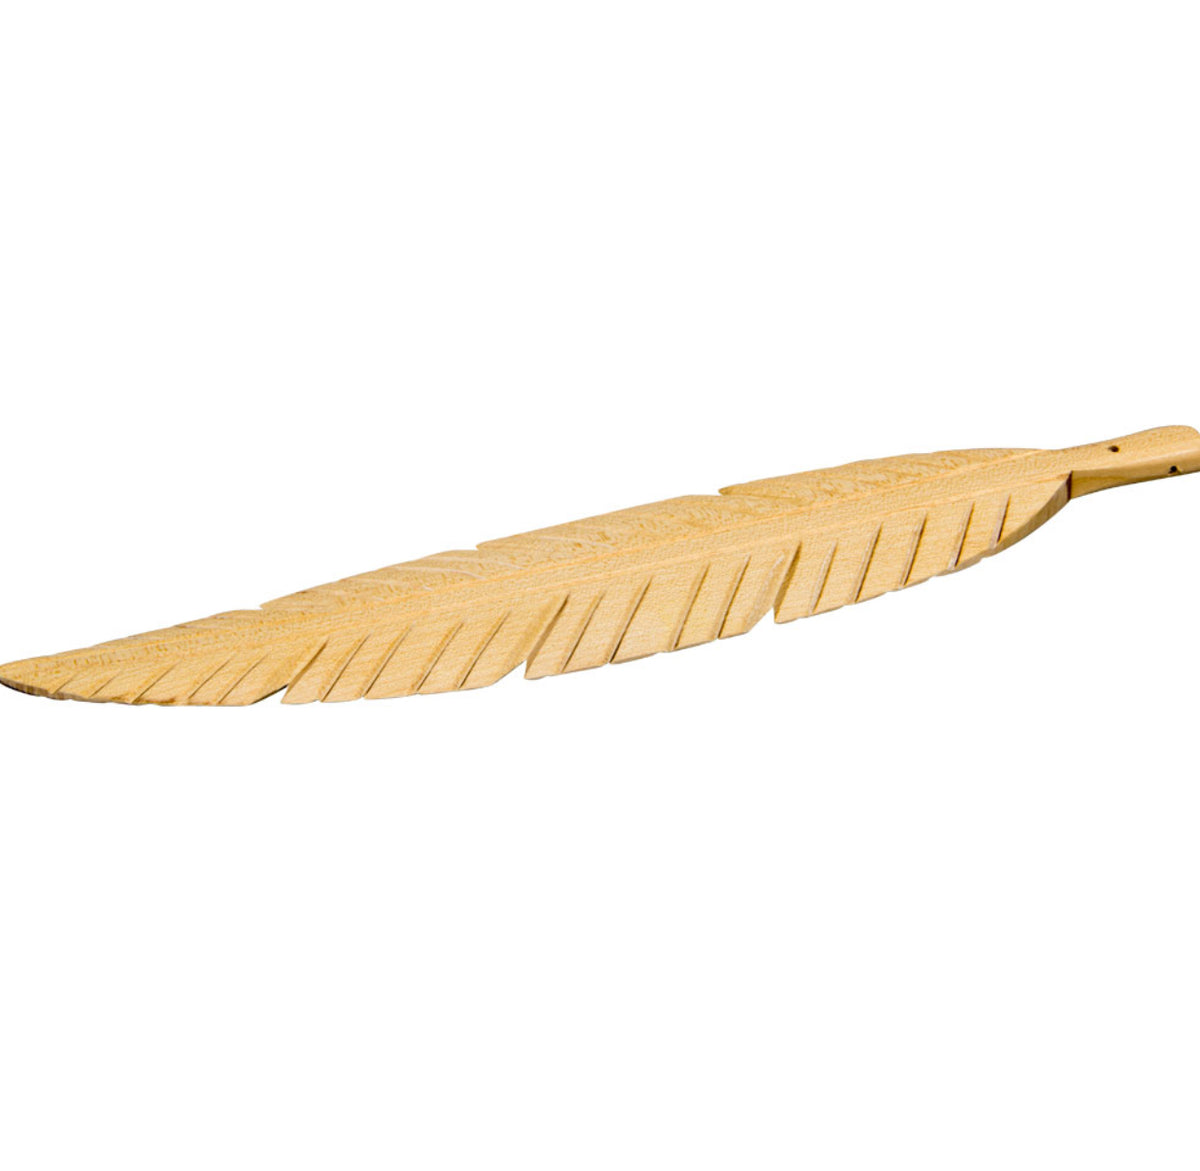 Feather Wooden Incense Stick Holder